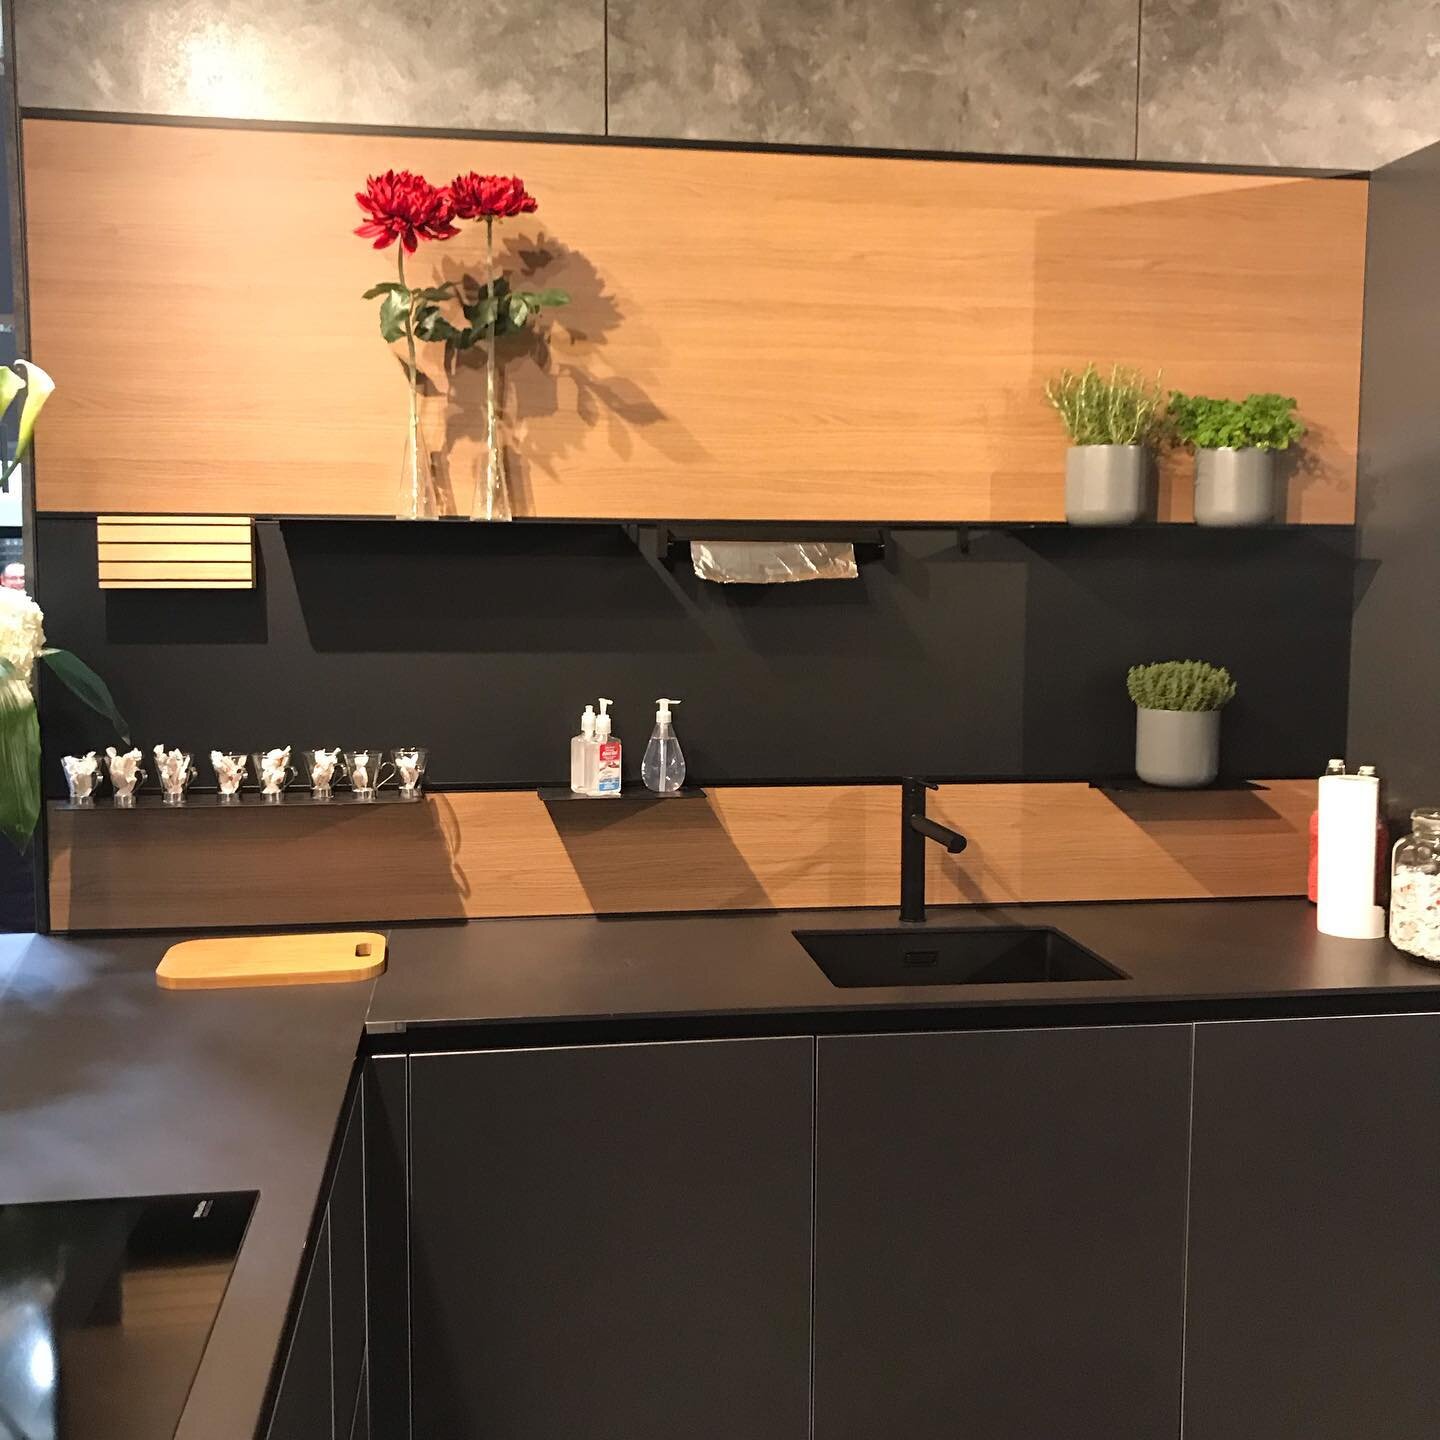 Just sat down after a full day walking round @kbb_birmingham loved catching up with our wonderful suppliers @rotpunktuk and seeing their stunning kitchens

#luxurykitchens #rotpunktuk #germankitchens